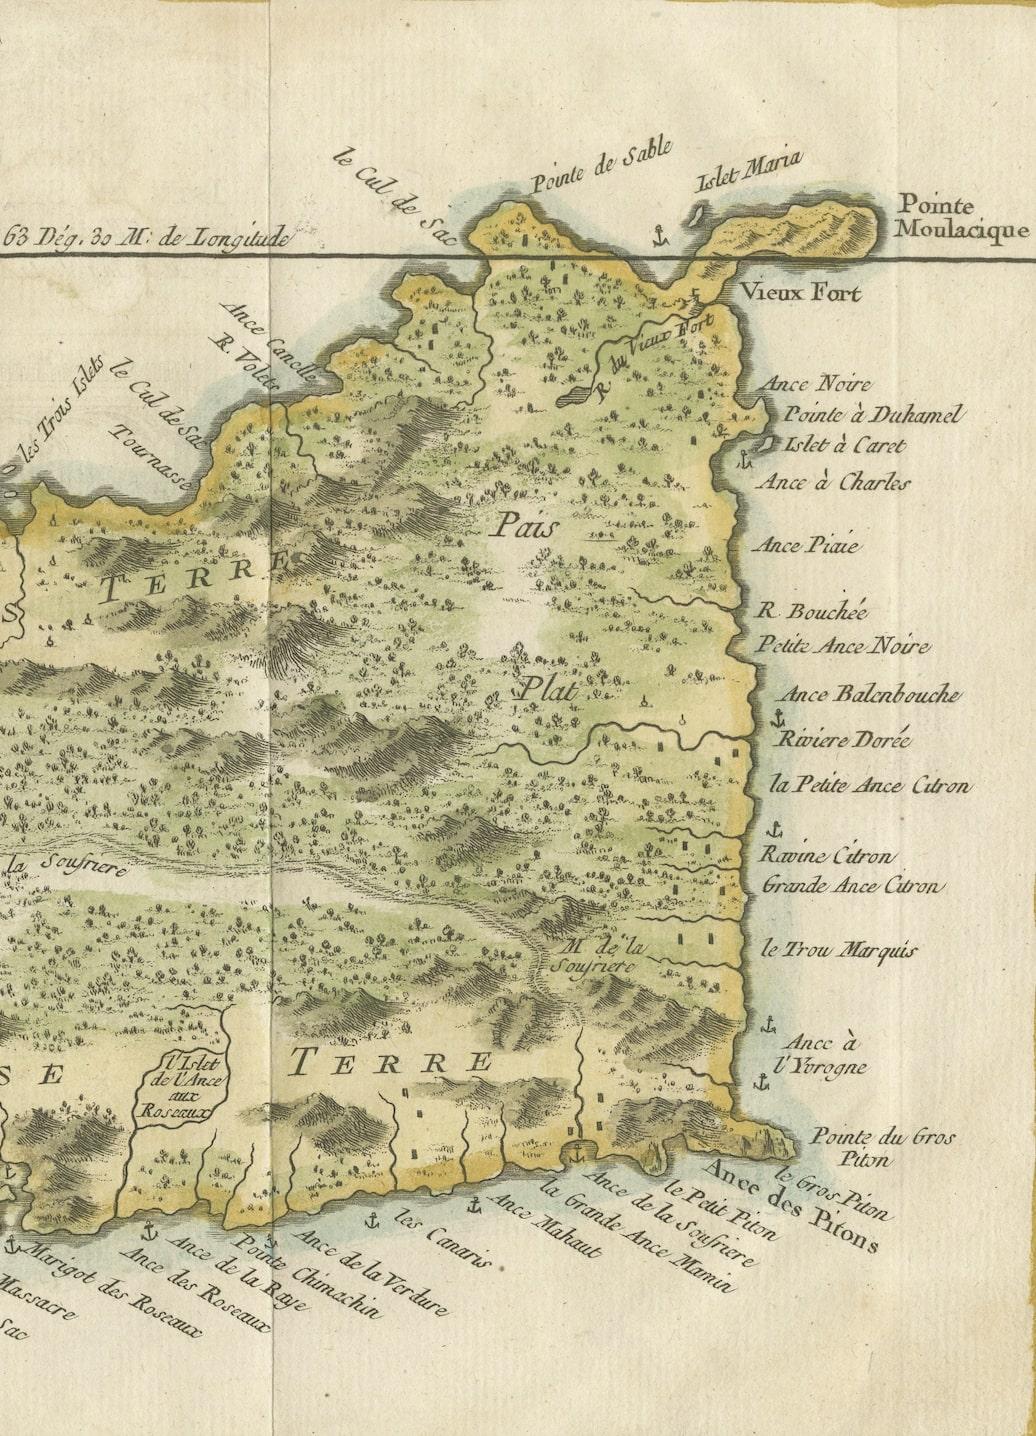 Paper Engraved Map by Bellin of Saint Lucia or Sainte Lucie in the West Indies, 1764